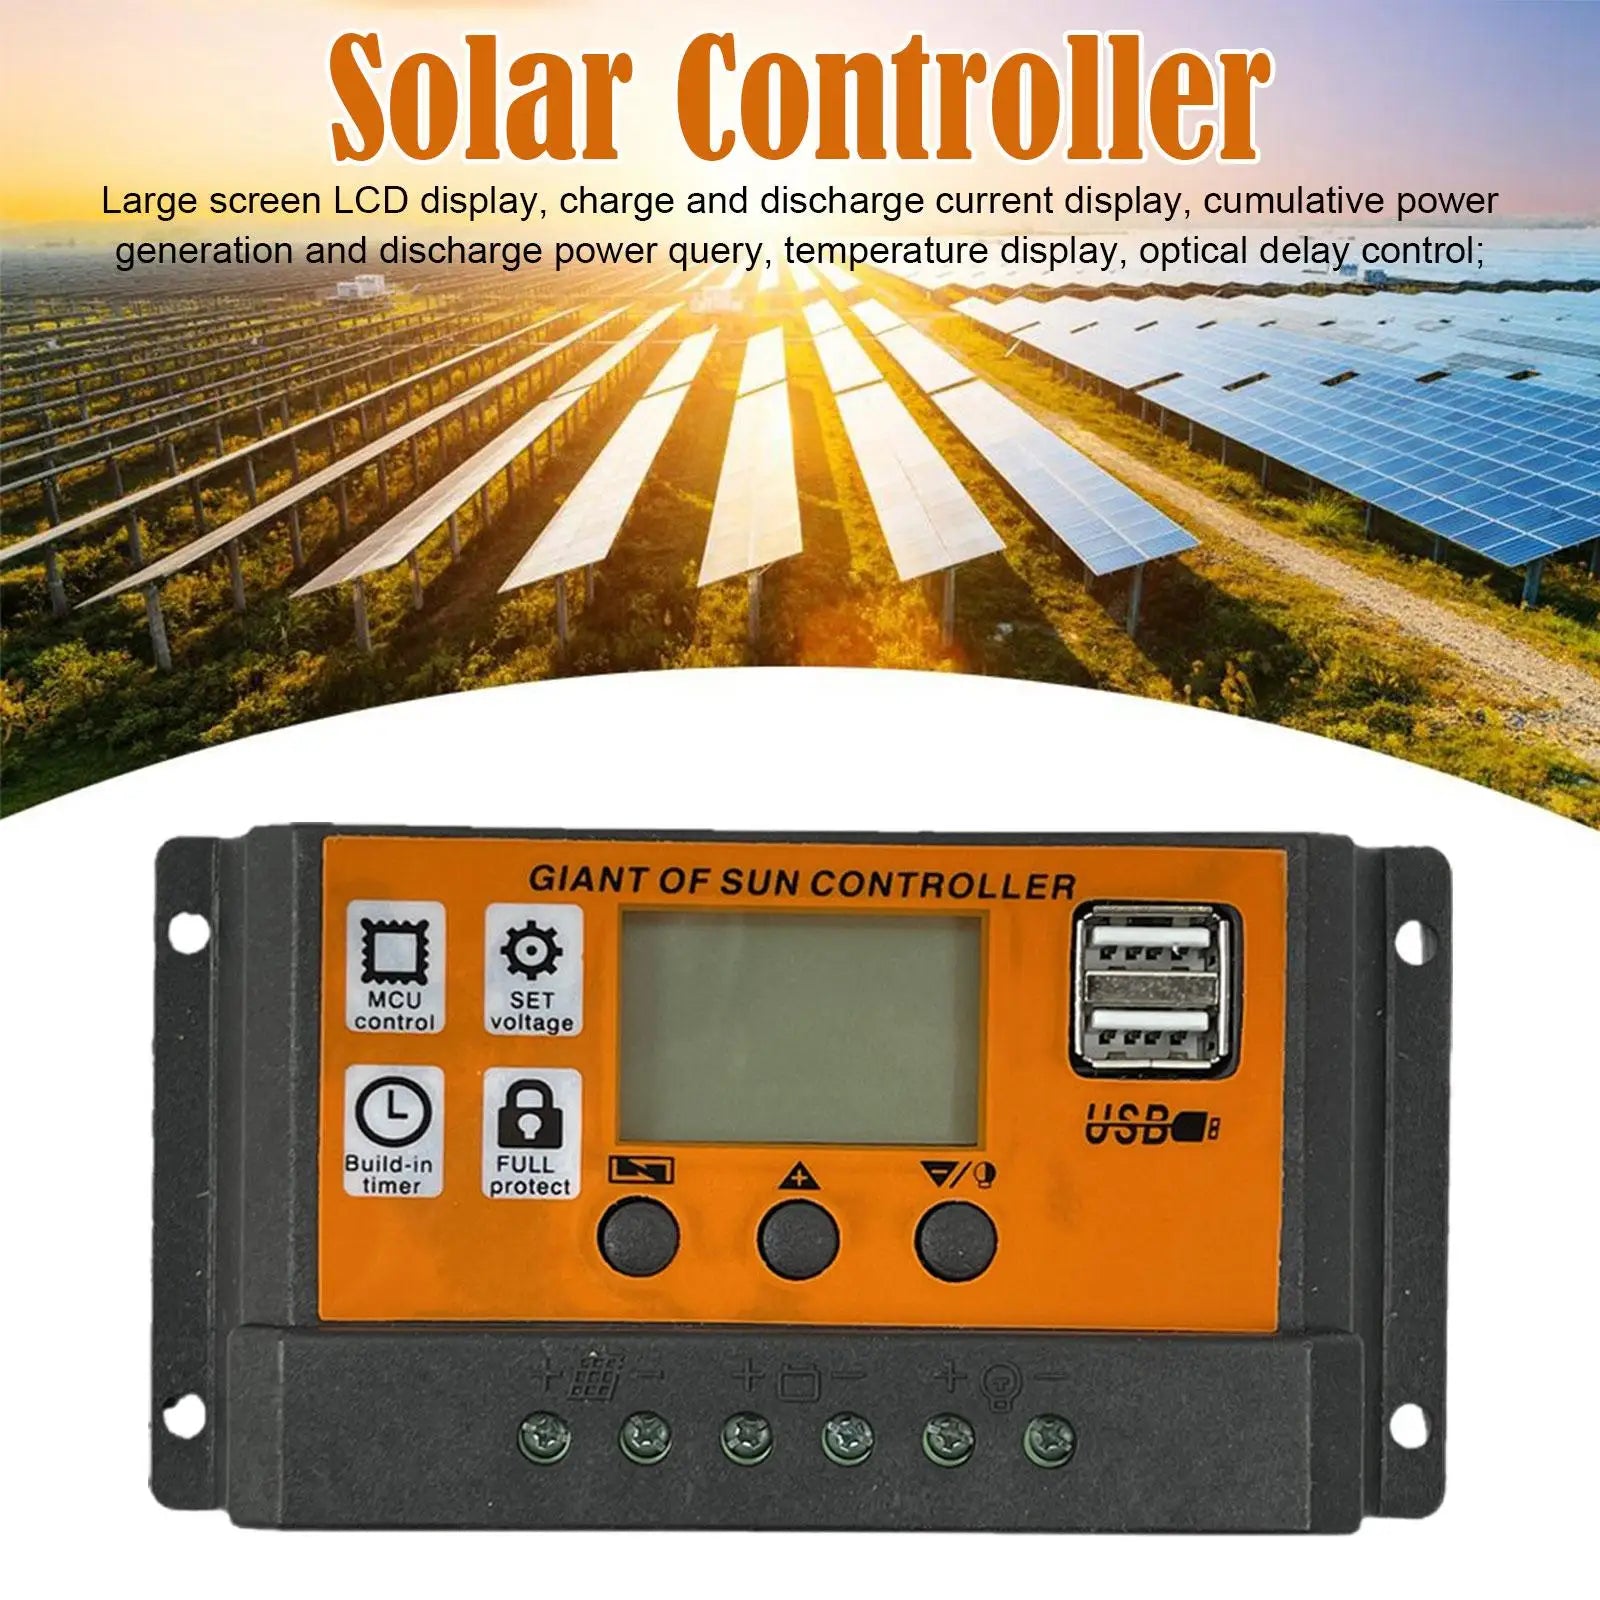 MPPT Solar Charge Controller, Real-time monitoring and protection for solar systems with LCD display and features like timer and USB output.